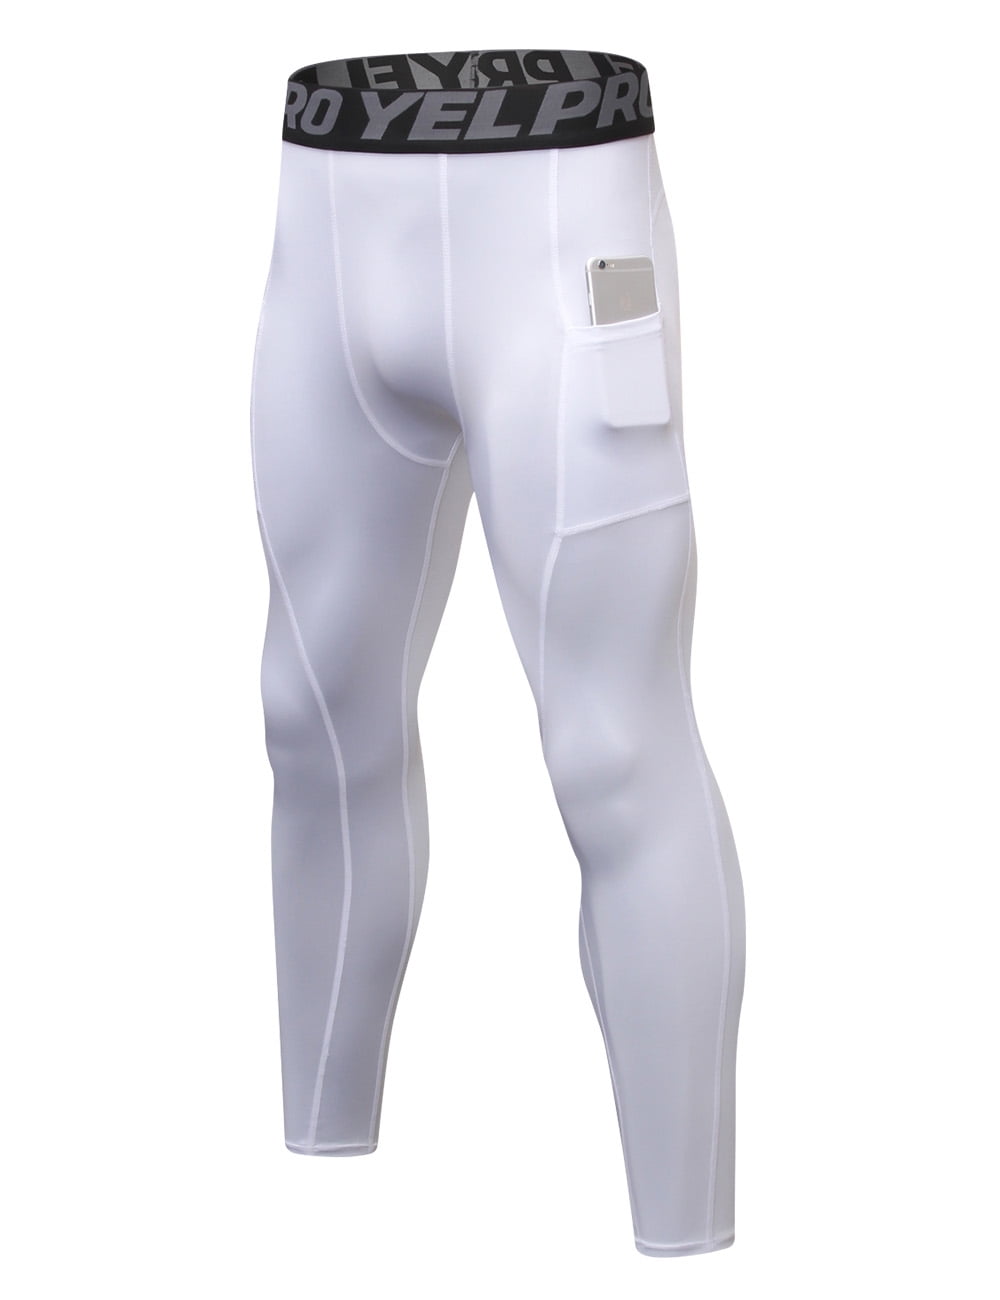 TOPTIE Mens Compression Tights Pants Cool Dry Sports Base Layer Running Leggings 